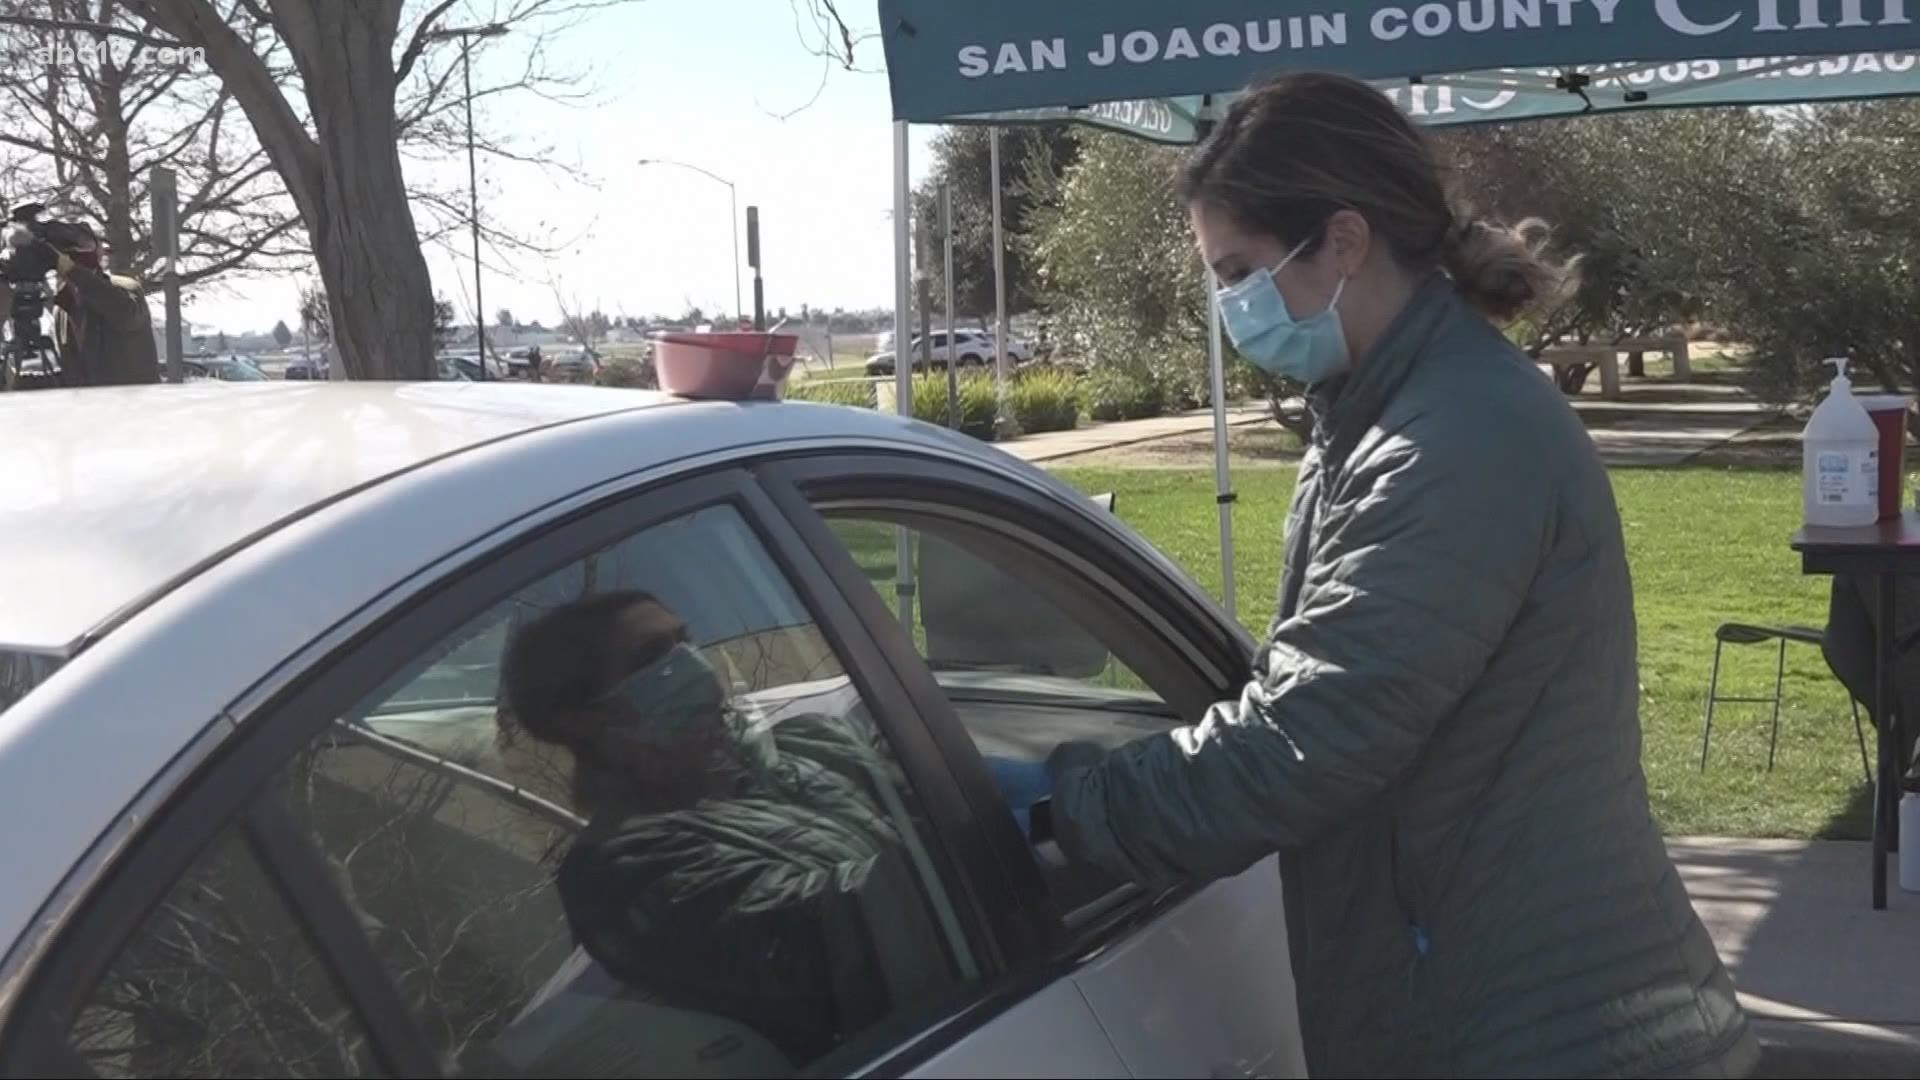 San Joaquin and Stanislaus counties have been hit hard by the virus, with many in the Latino community catching COVID-19 disproportionately to other populations.